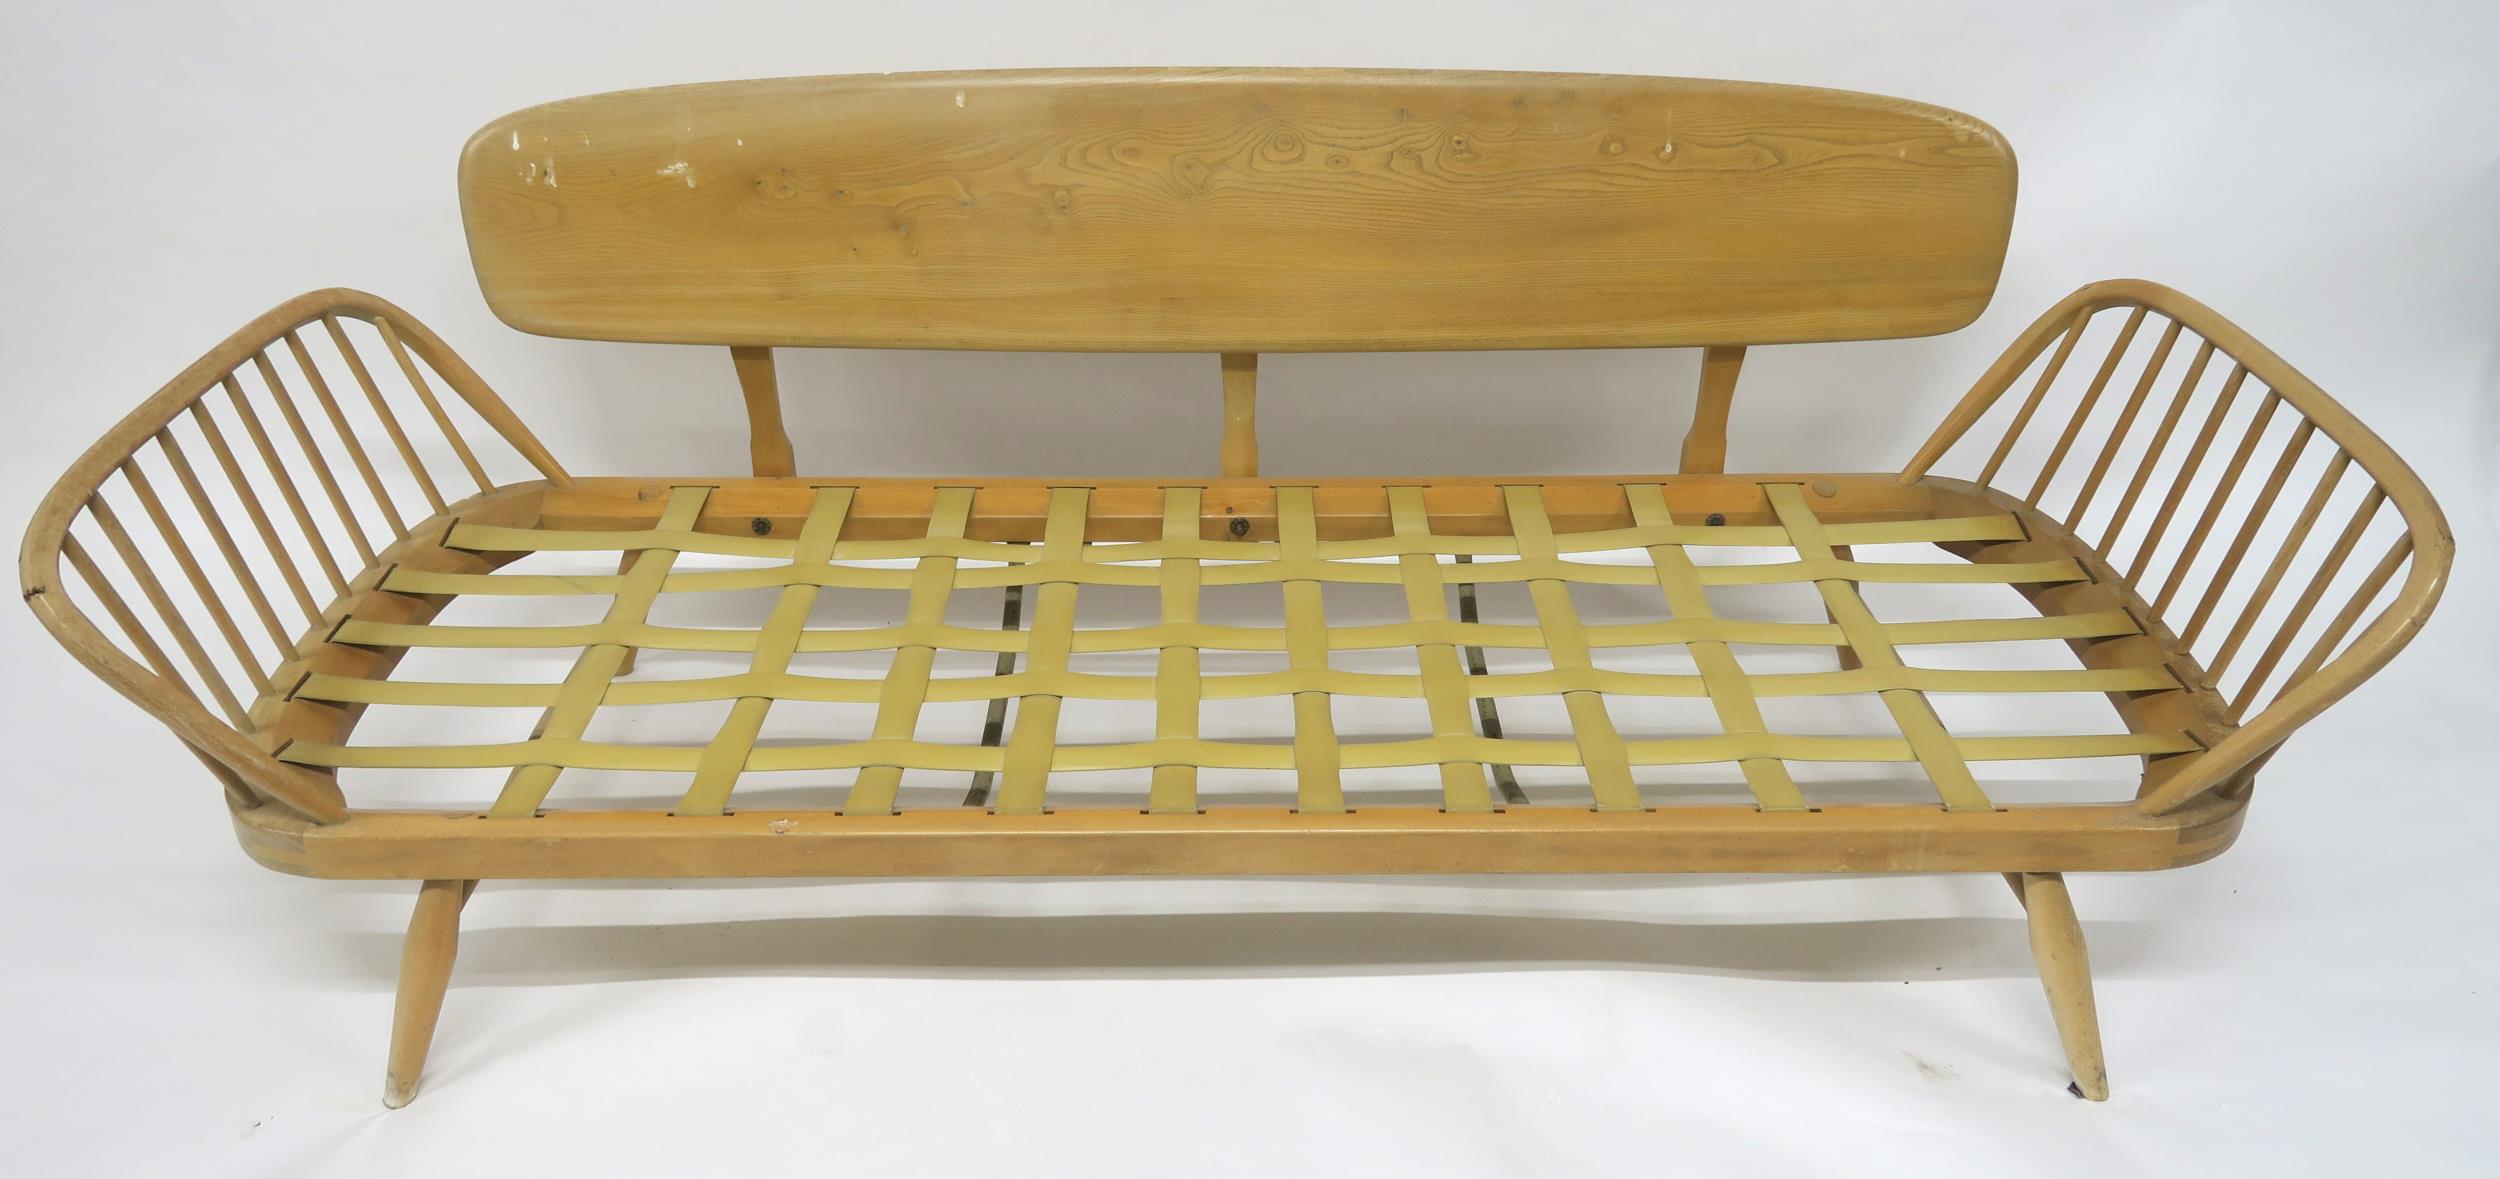 A MID 20TH CENTURY ELM AND BEECH FRAMED ERCOL DAY BED with floral upholstered cushions, 77cm high - Image 10 of 11